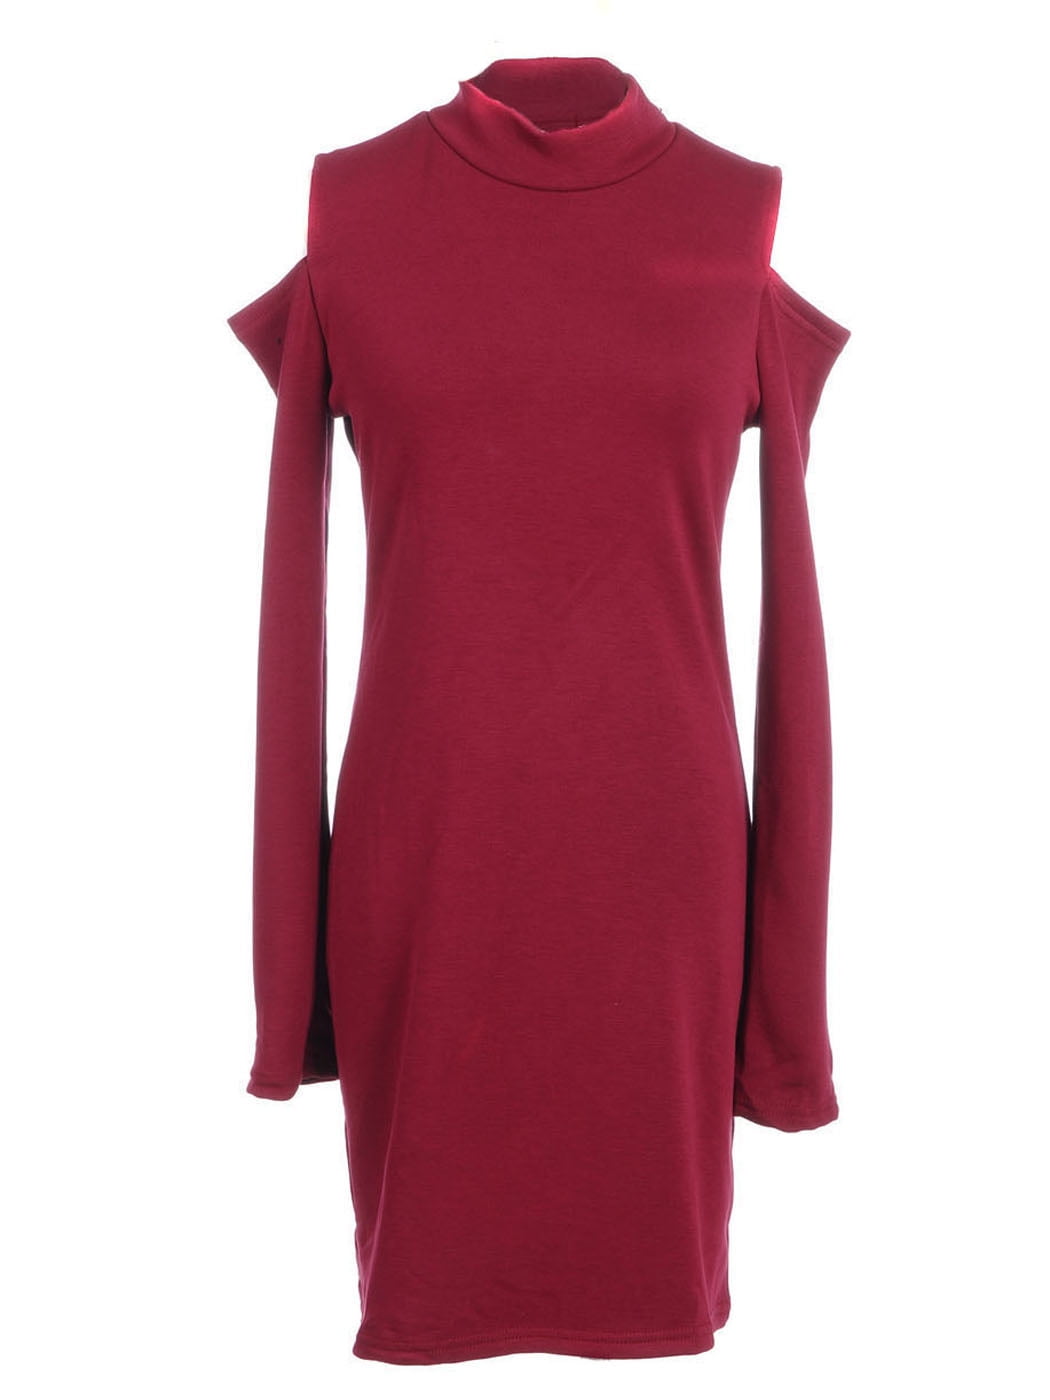 S/M Fit Maroon Red Cut Out Shoulders Midi Length Turtle Neck Dress ...